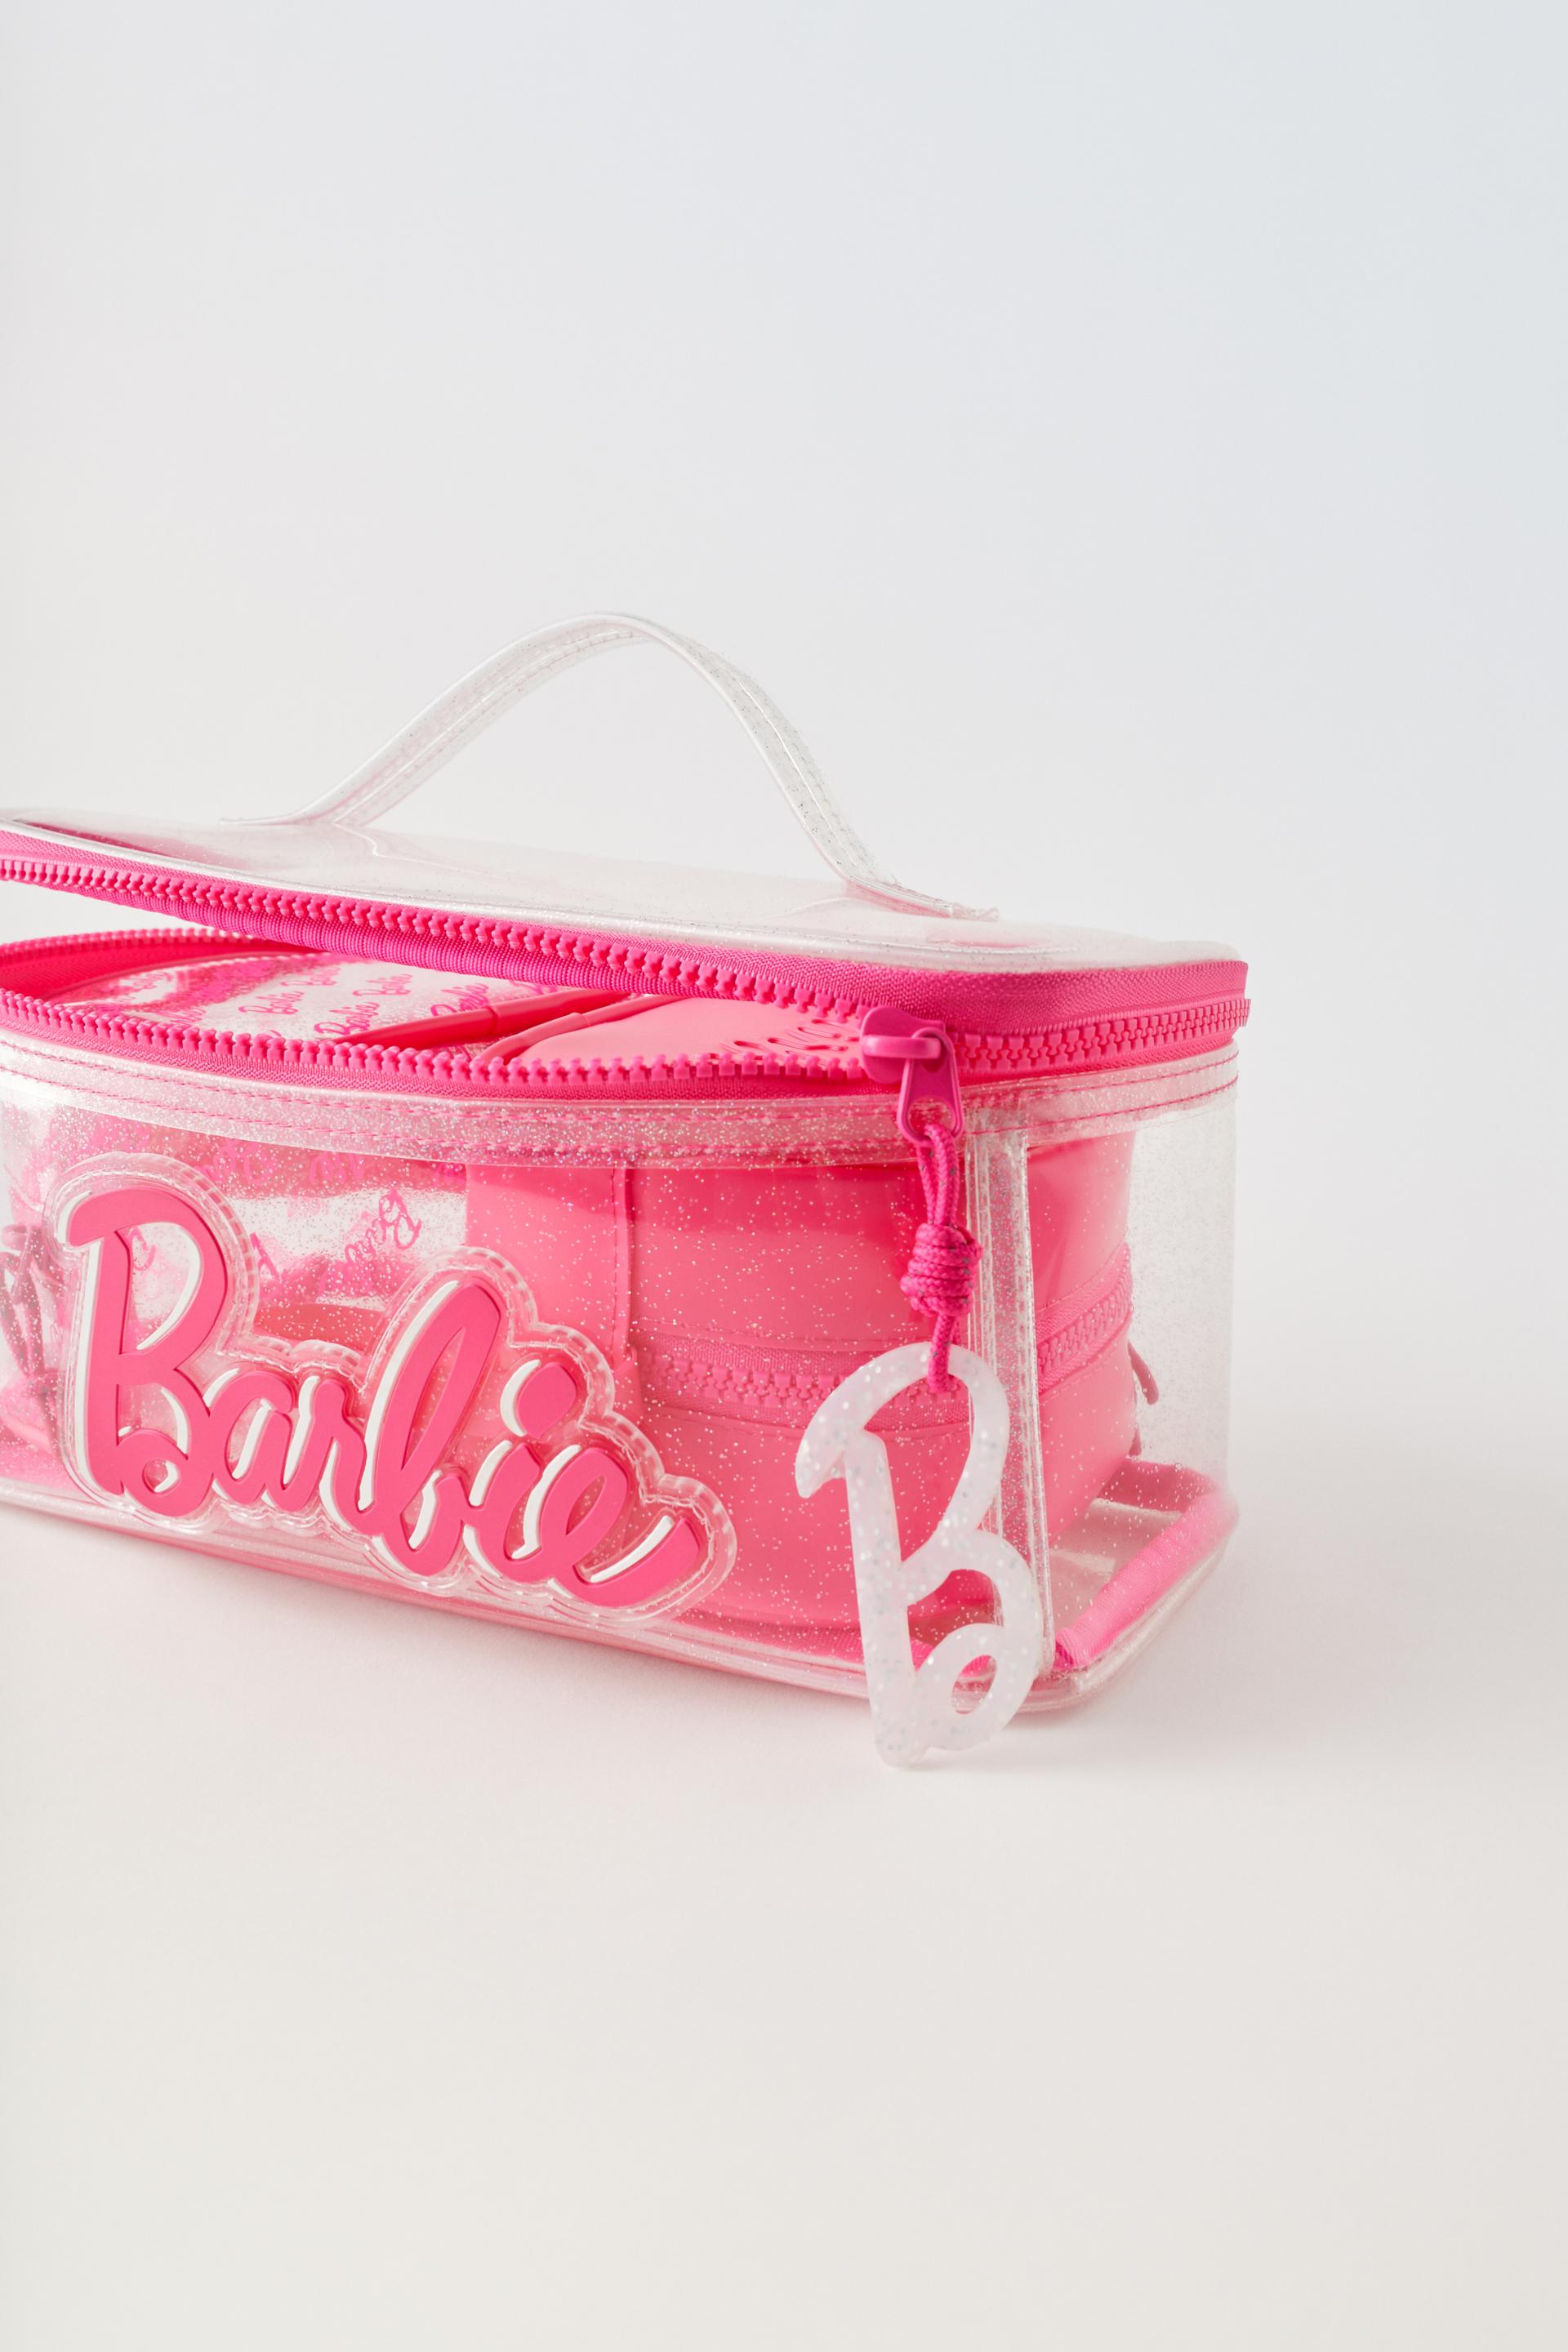 Puchi Bag for Barbie  Barbie, Bags, Pink and white stripes